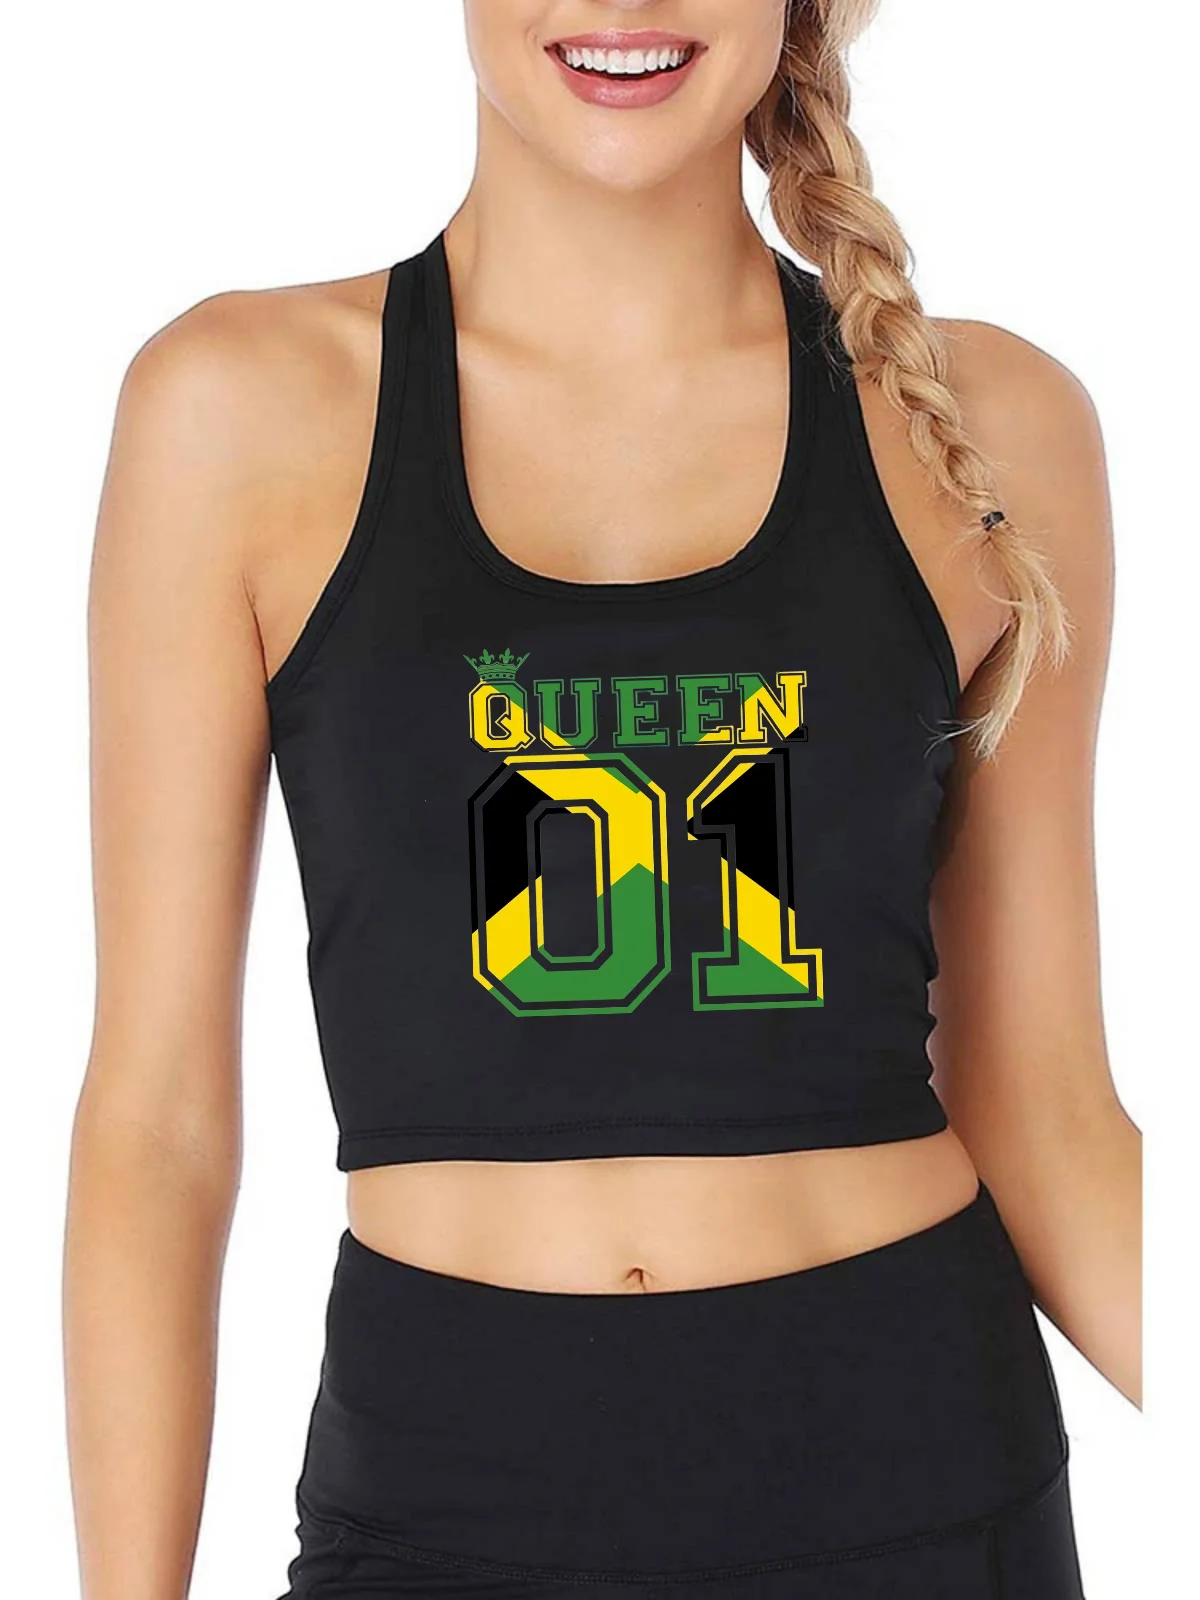 

A Caribbean Pride Design Sexy Breathable Slim Fit Crop Top Women Personality Customizable Tank Tops Gym Fitness Shirt